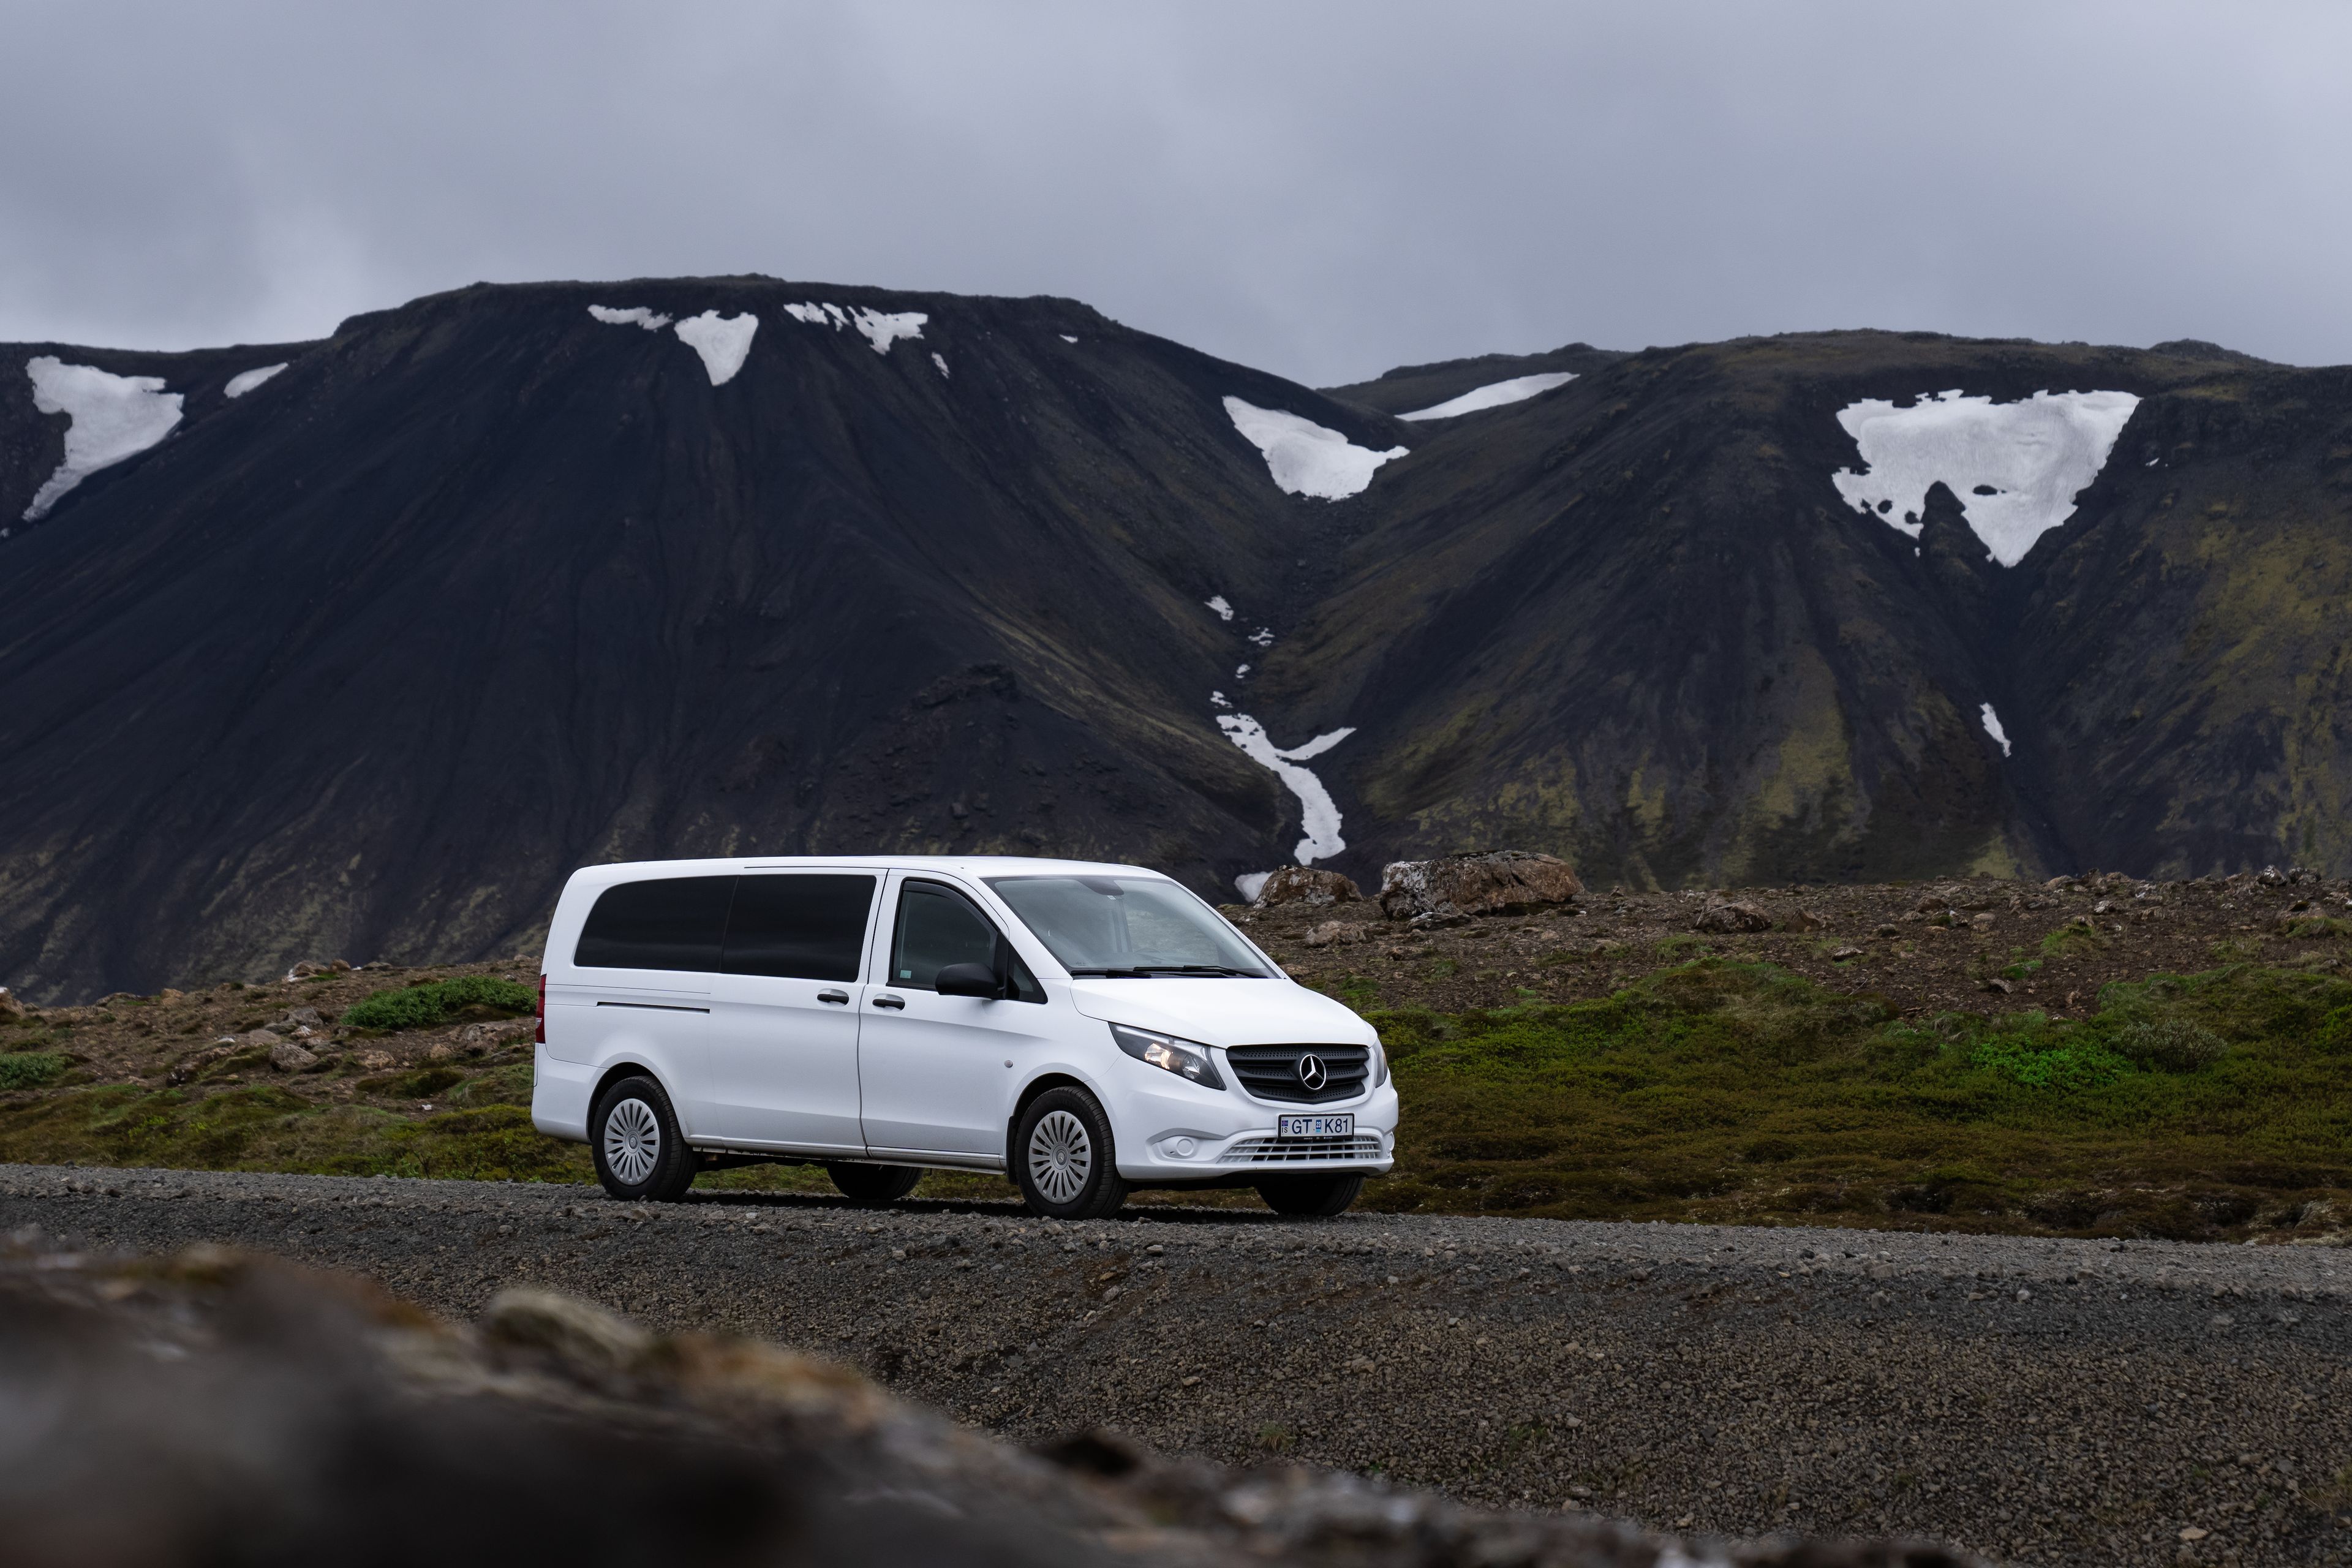 The mercedes vito driving on a gravel road in Iceland